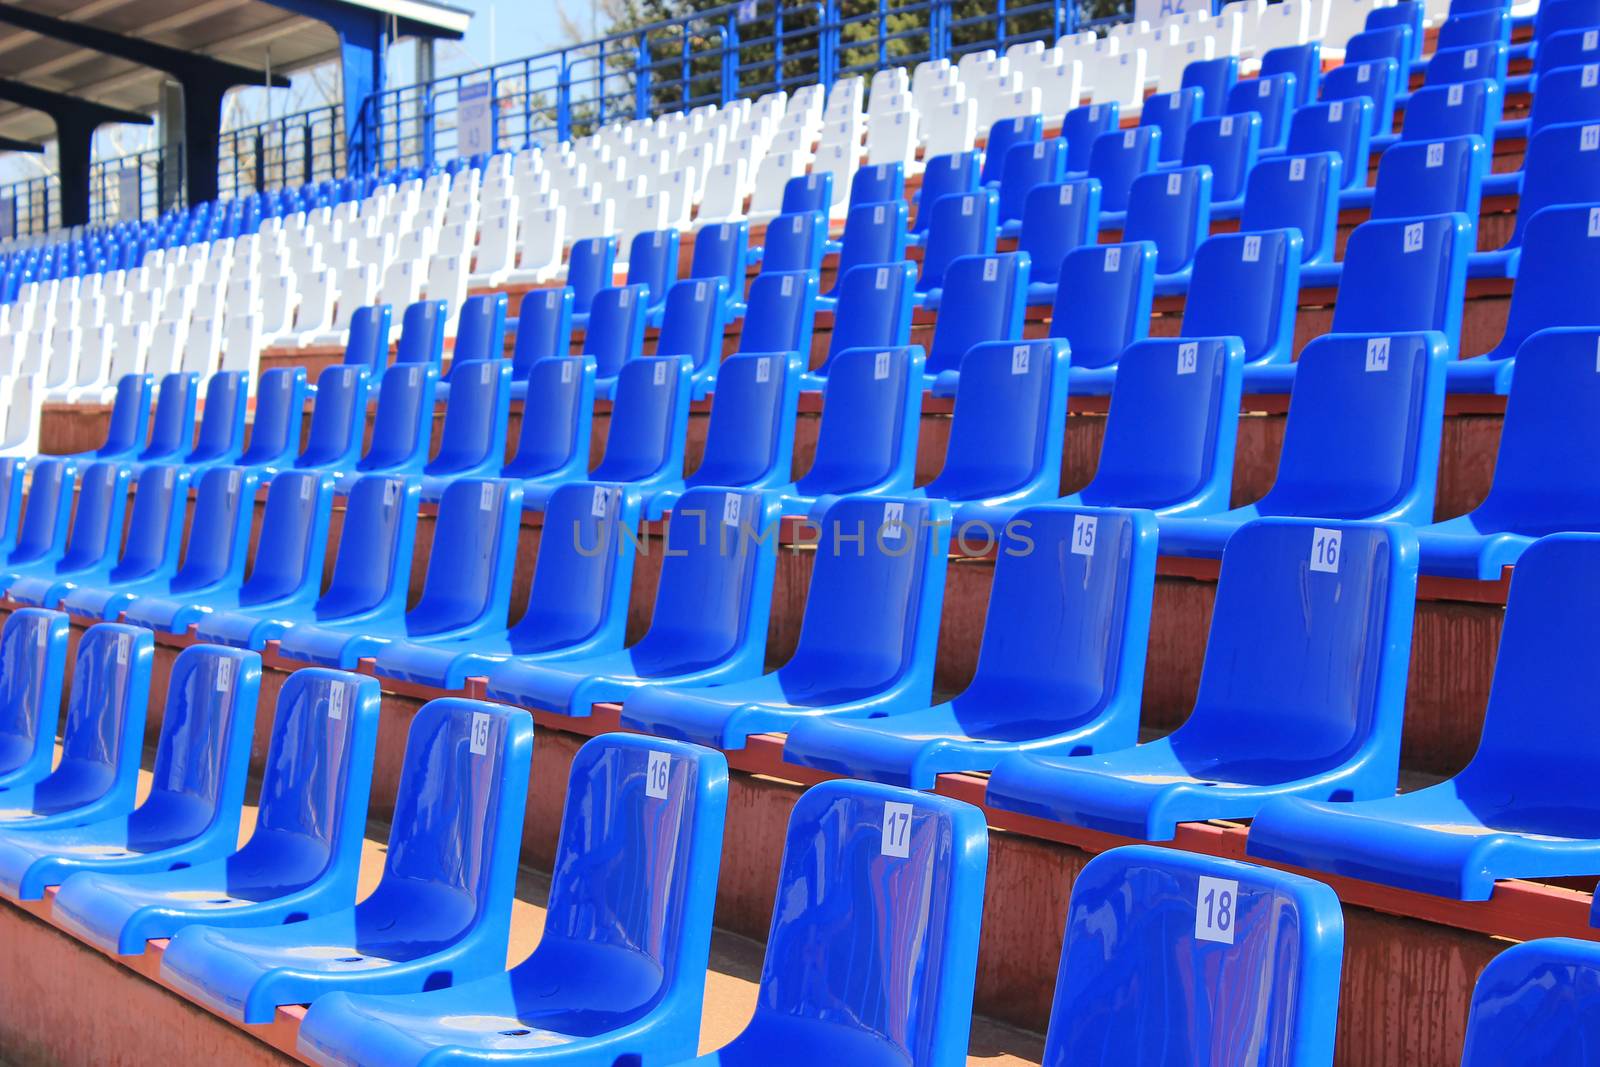 Tribune with folding chairs at small old stadium